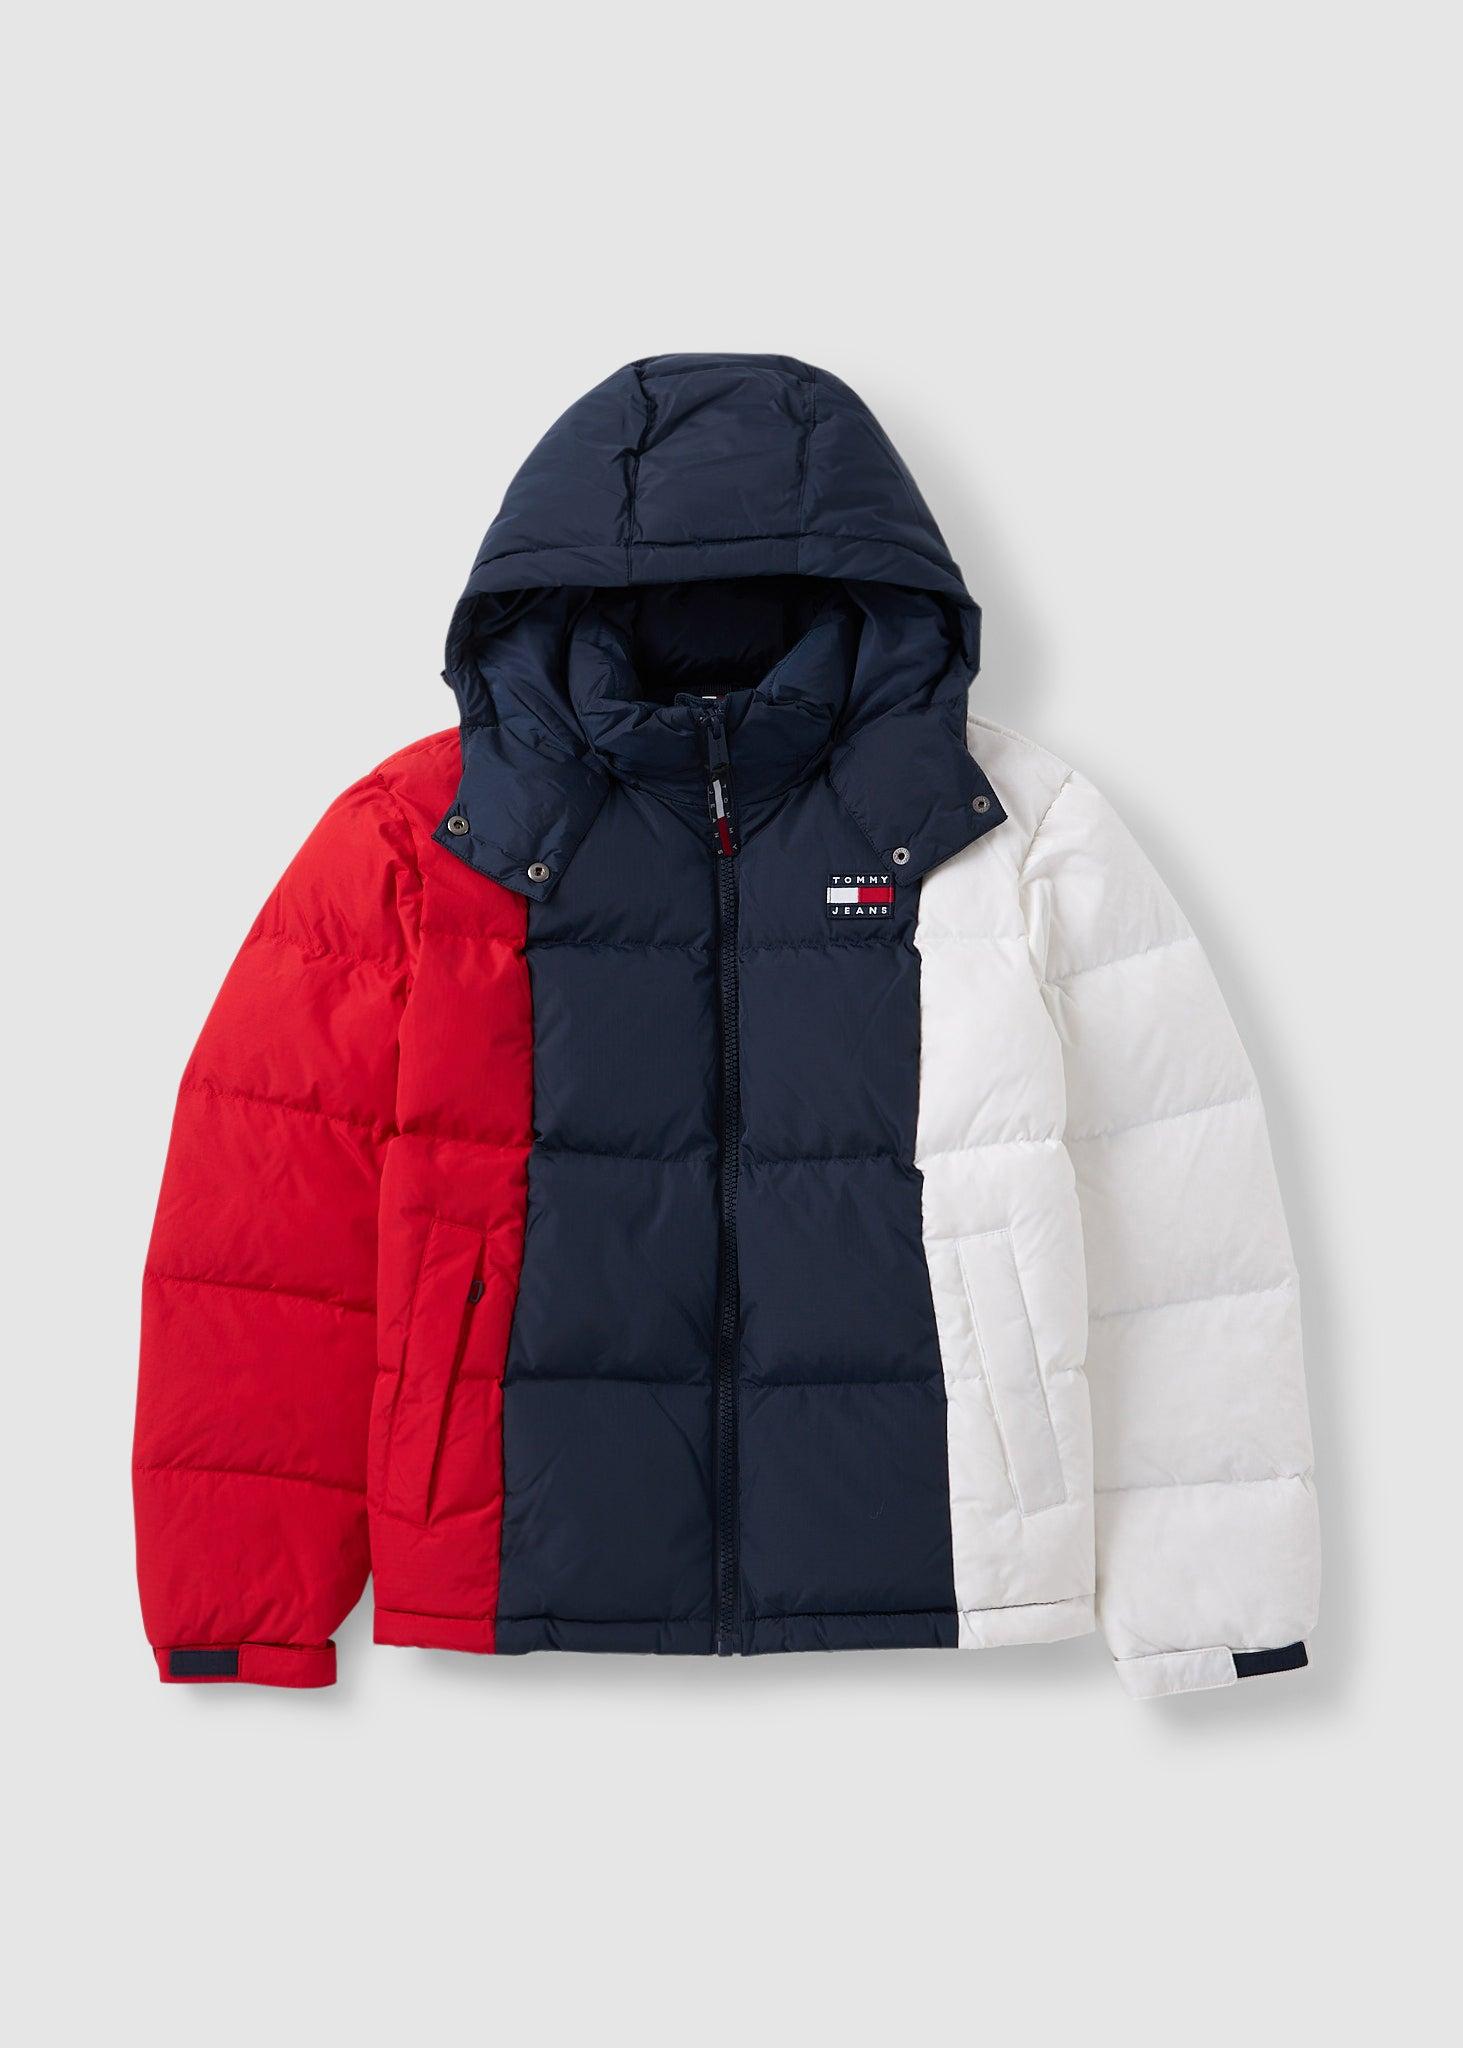 Tommy Hilfiger S Alaska Colorblock Puffer Jacket in Red | Lyst